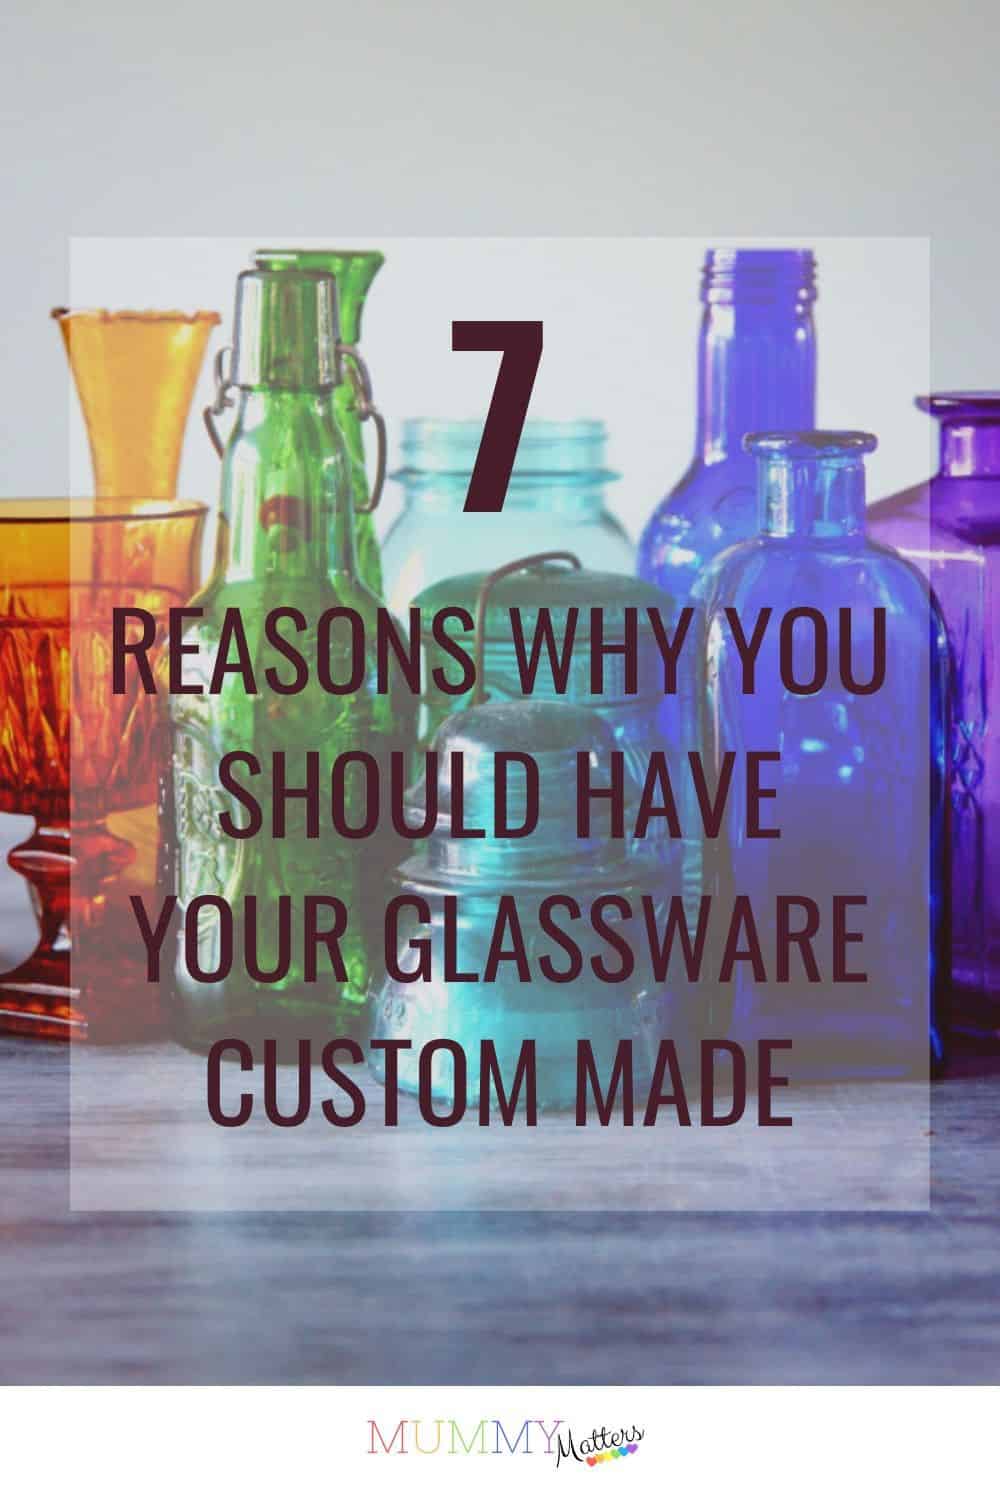 Glassware has always been a multifaceted product. Faults can easily appear which is why you should really think about having your glassware custom made. 